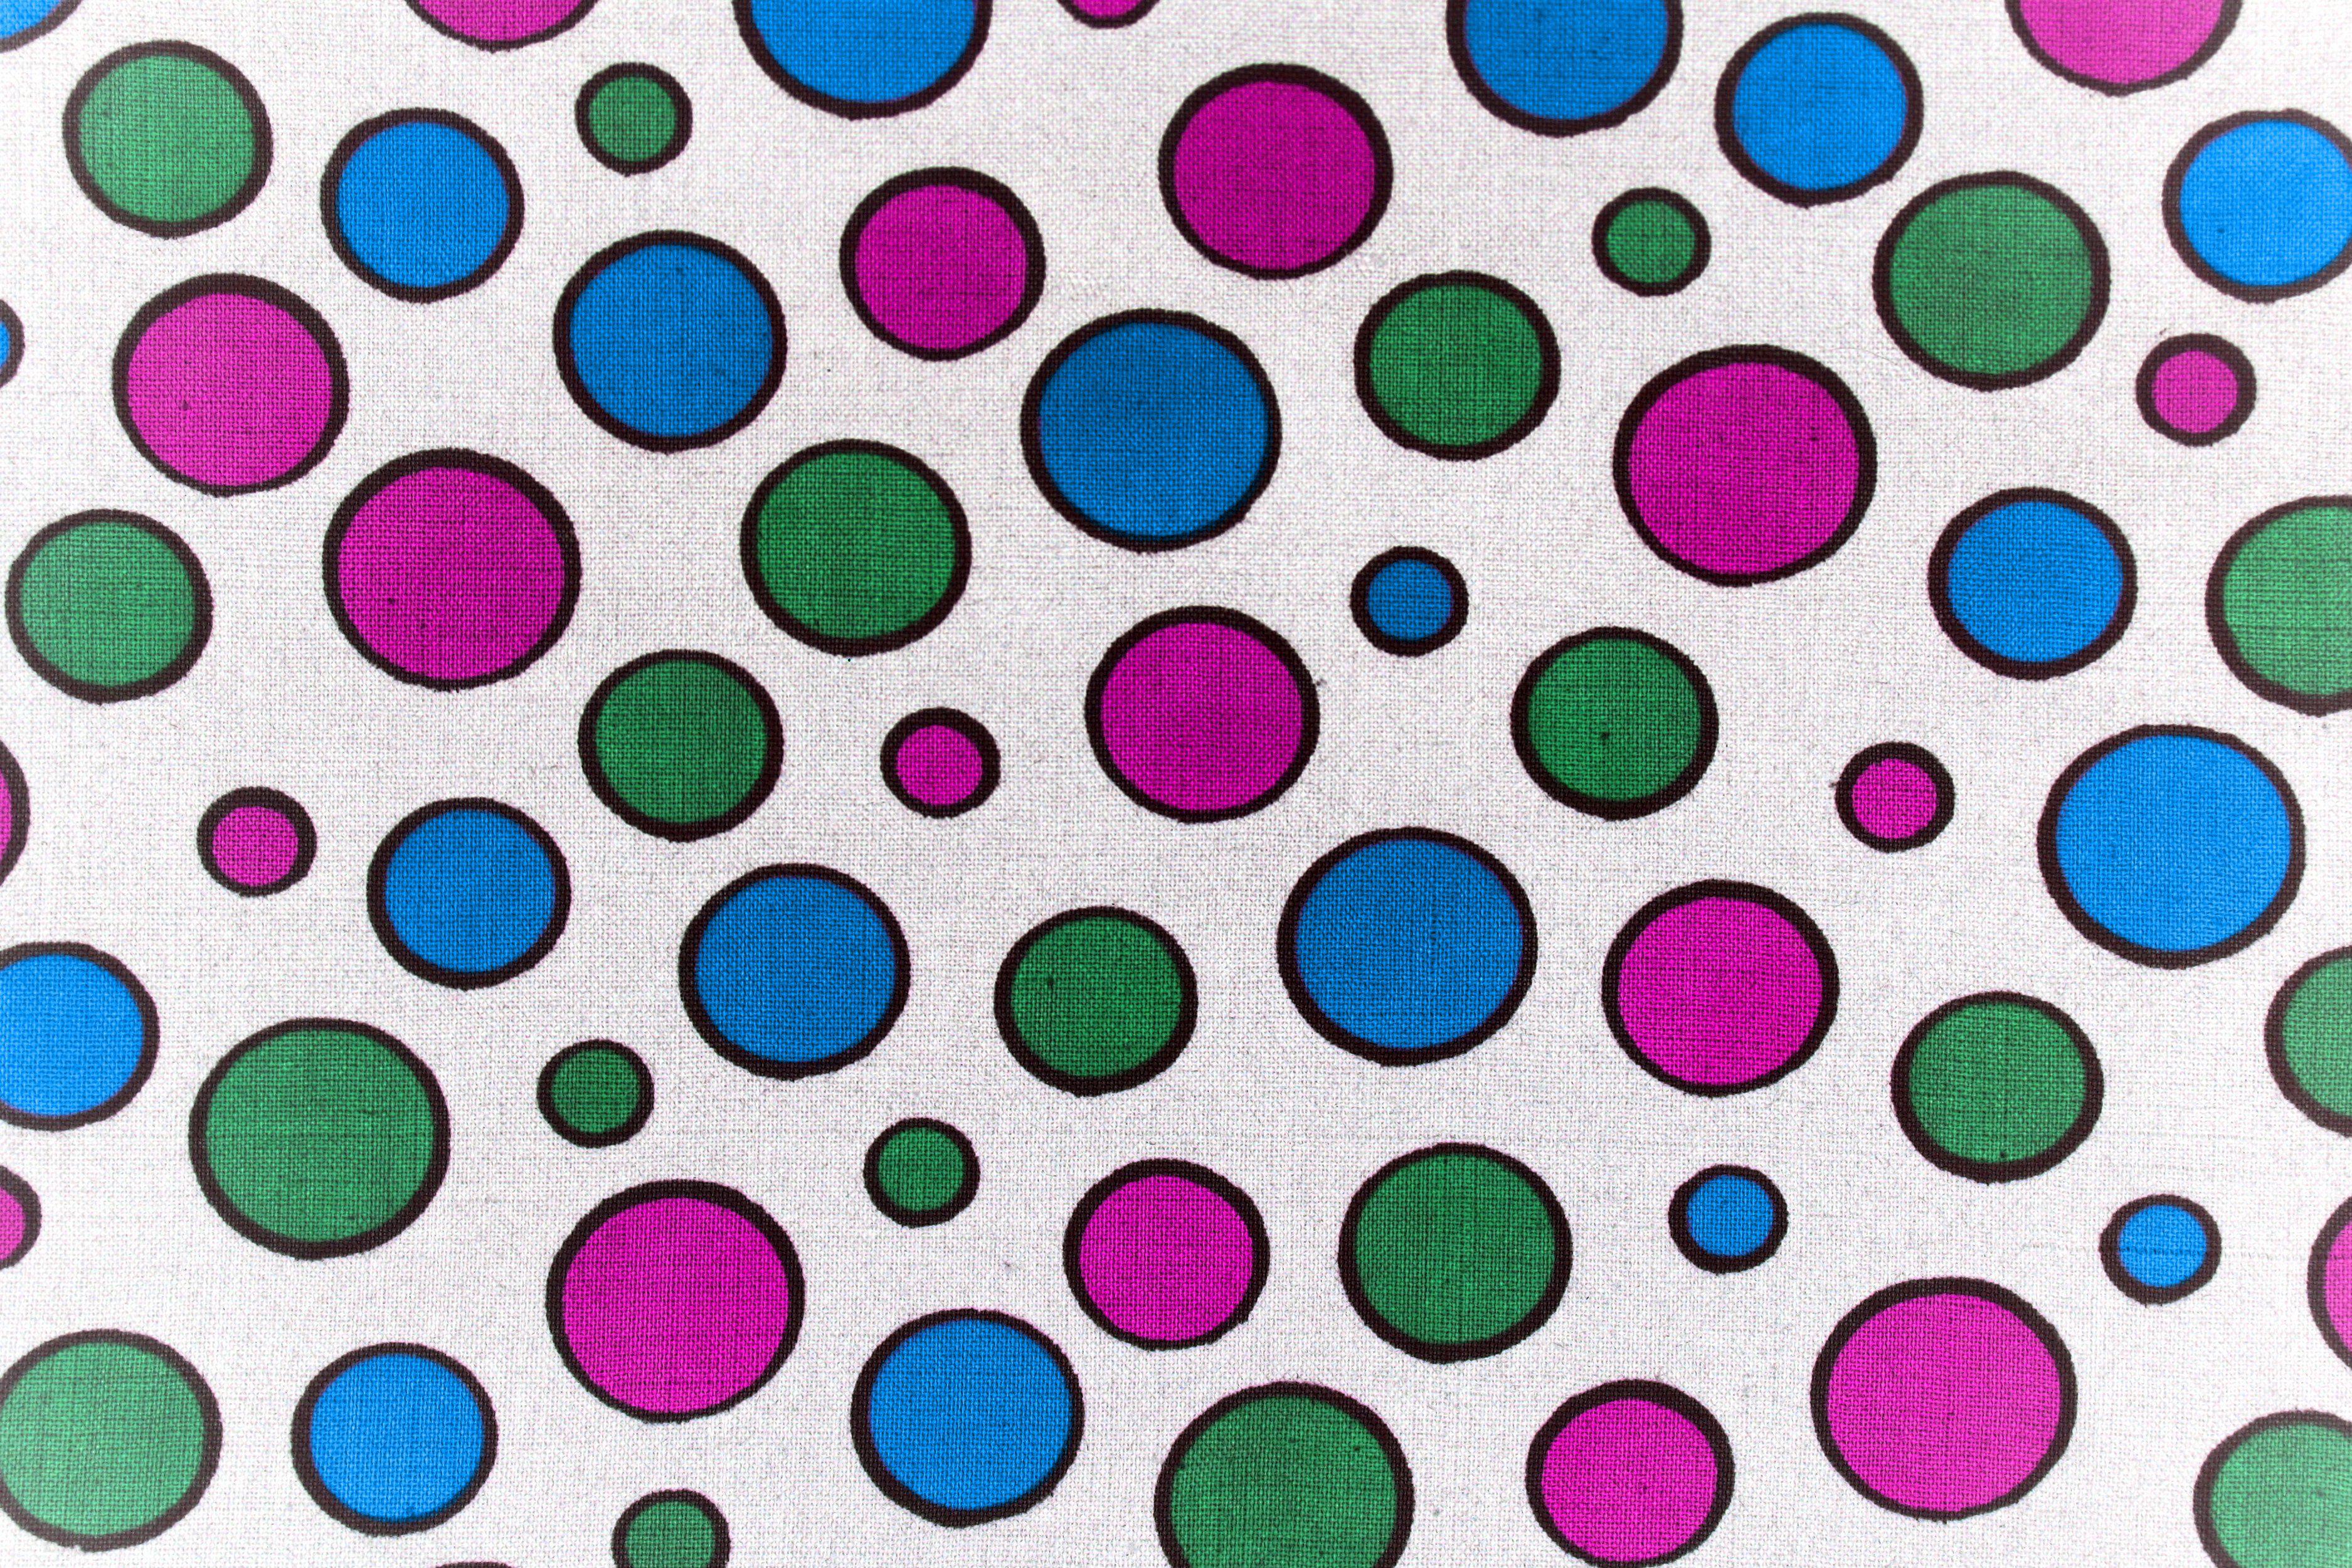 Pink Dot Blue Dot Logo - White Fabric with Pink, Green and Blue Dots Texture Picture | Free ...